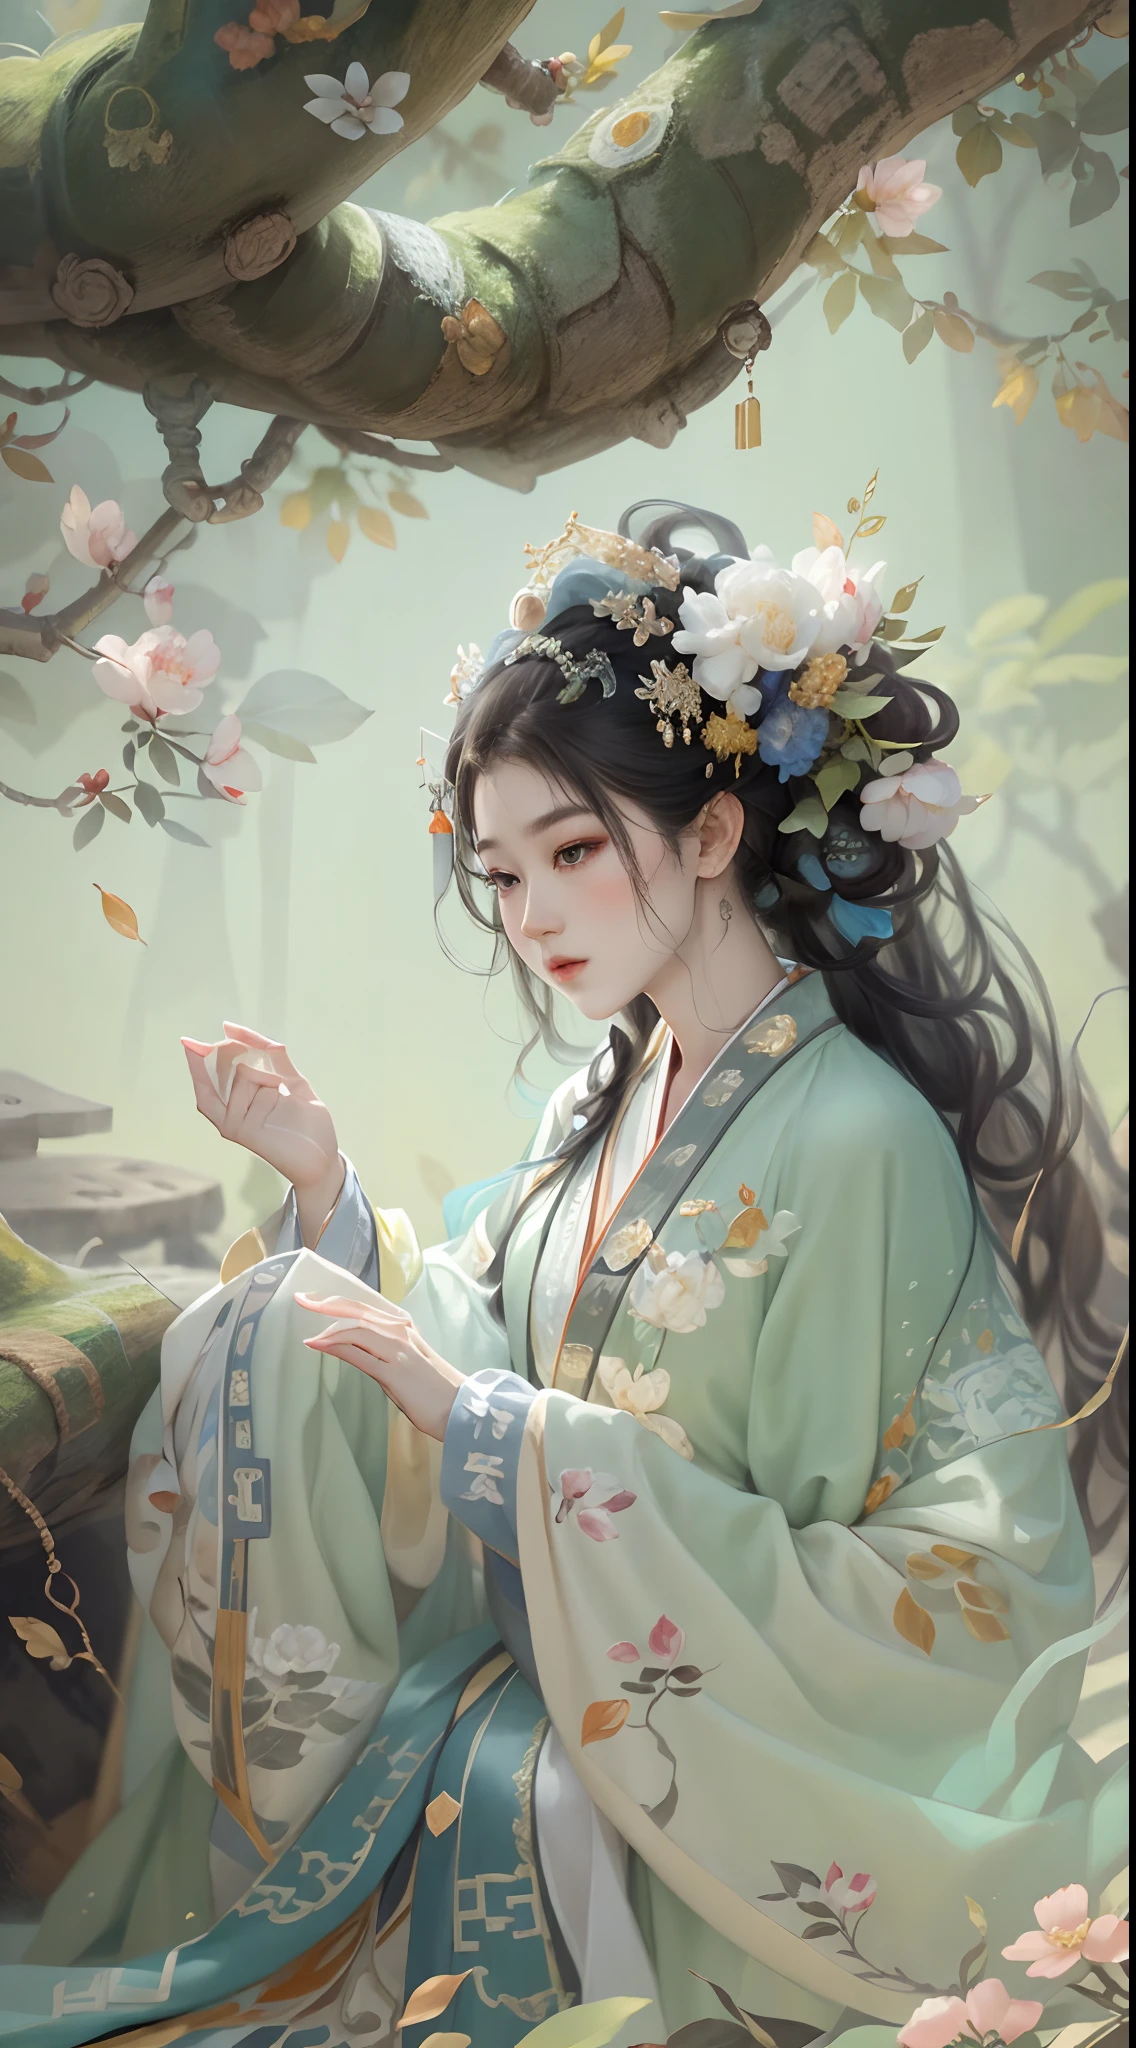 There was a woman in a dress sitting under a tree, Guviz-style artwork, Guviz, Palace ， A girl in Hanfu, trending on cgstation, Fantasy art style, Inspired by Ai Xuan, Alice X. zhang, White Hanfu, by Yang J, Hanfu, Guwiz in Pisif art